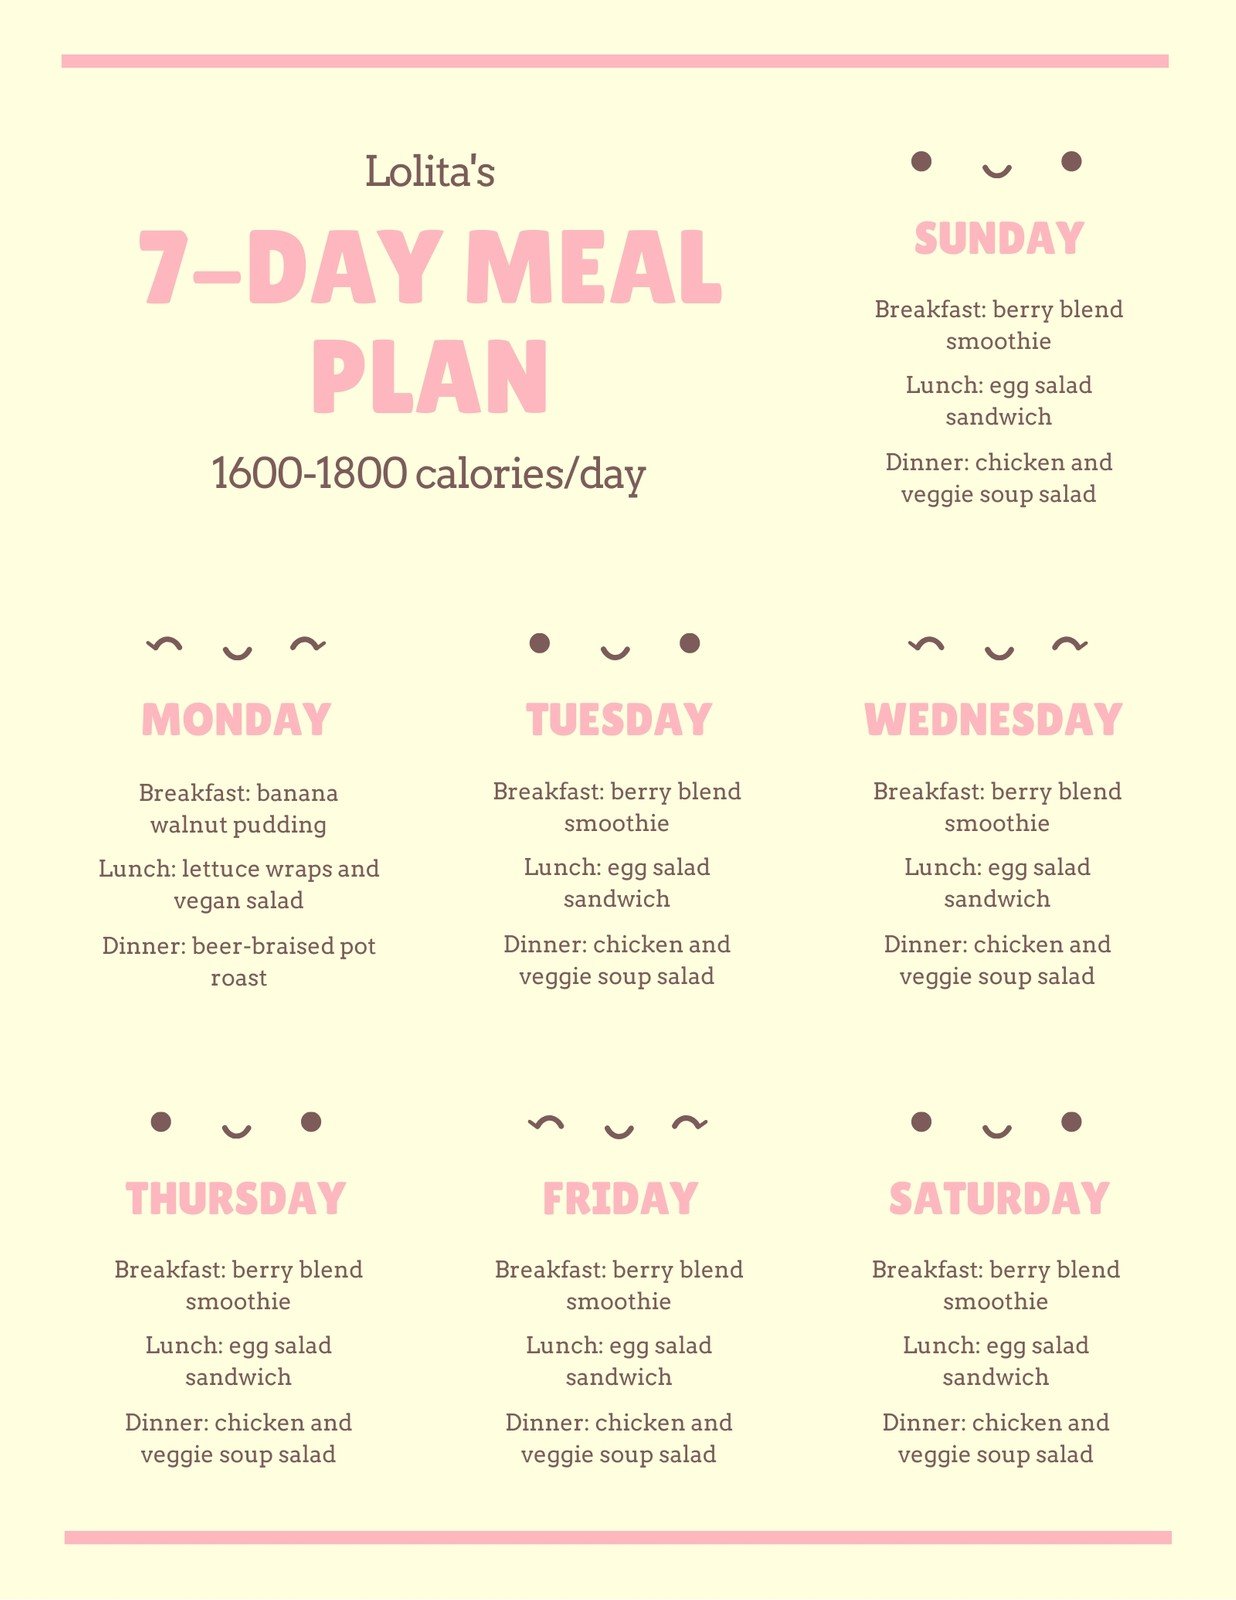 Free, customizable meal planner menu templates  Canva With Menu Chart Template